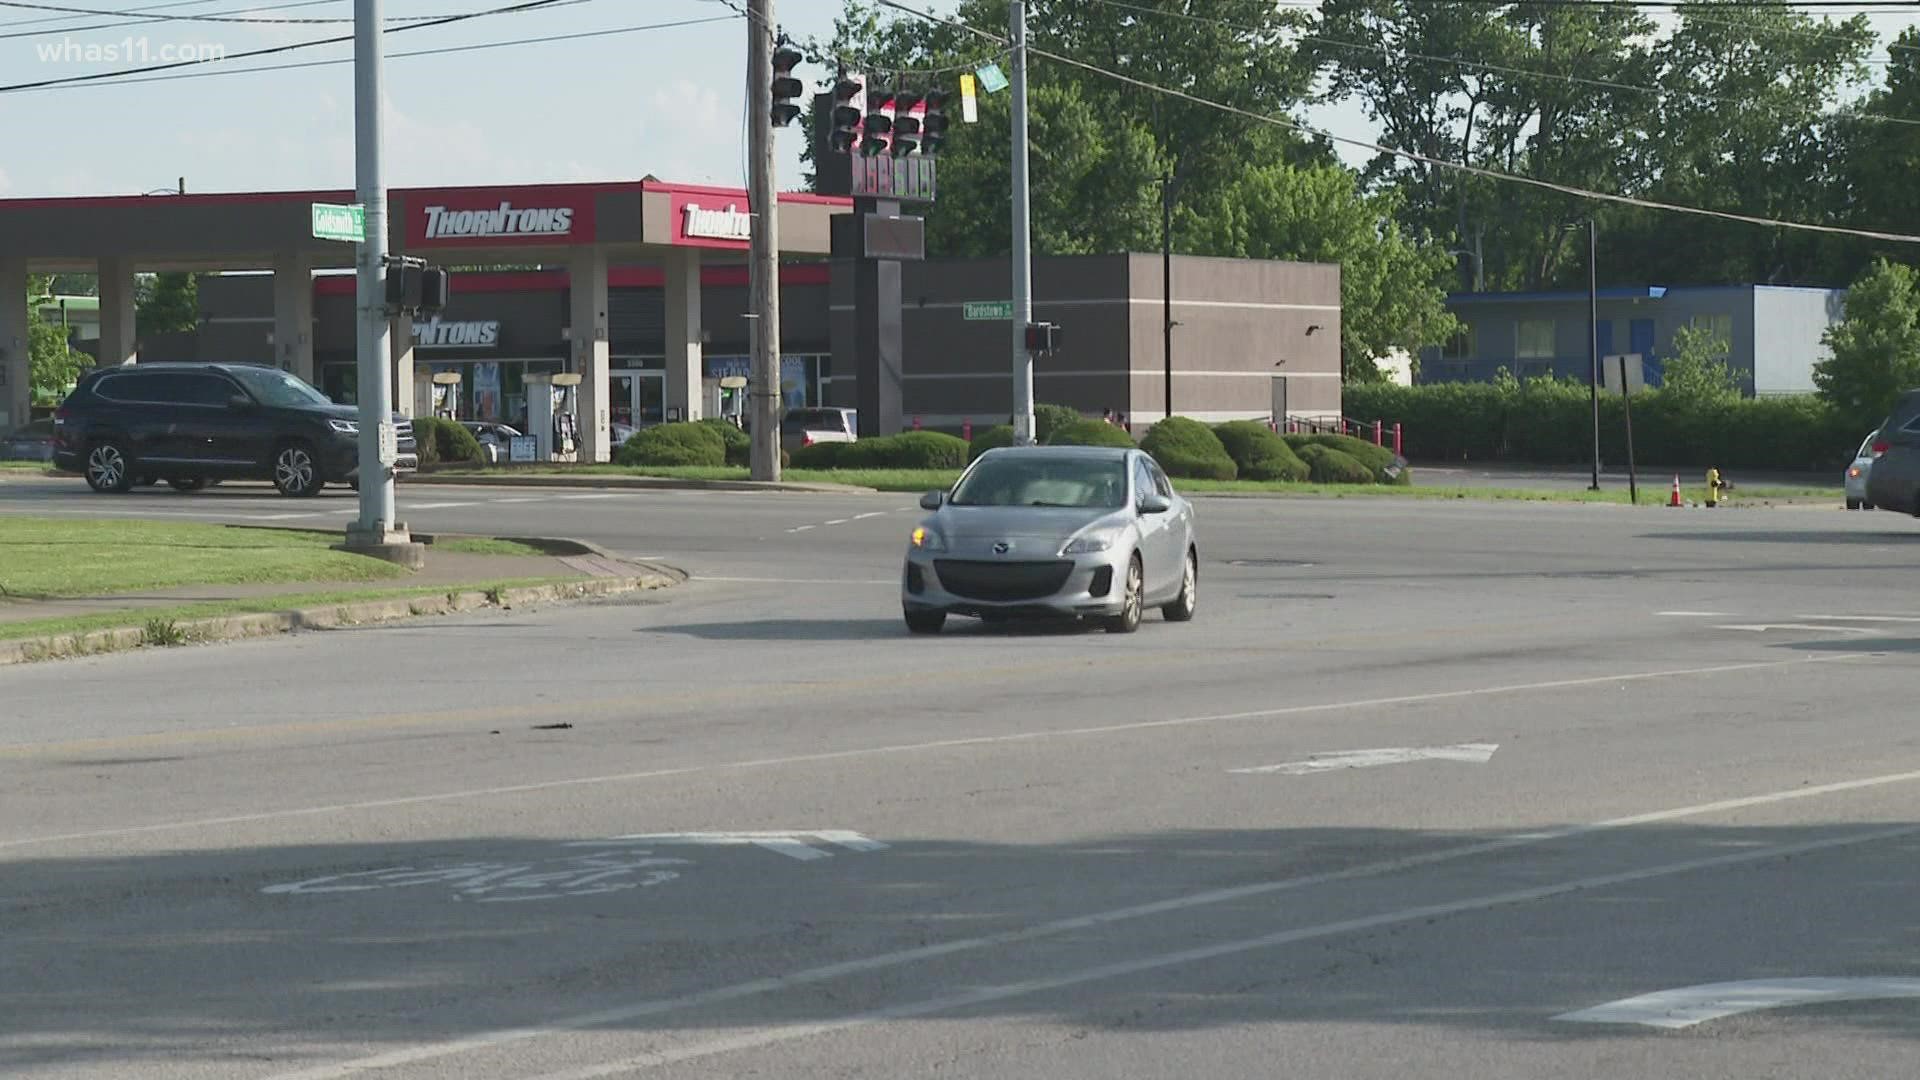 Since 2014, 931 Louisvillians have died in crashes on the city's roads according to metro government. A new proposal aims to get that number to zero.